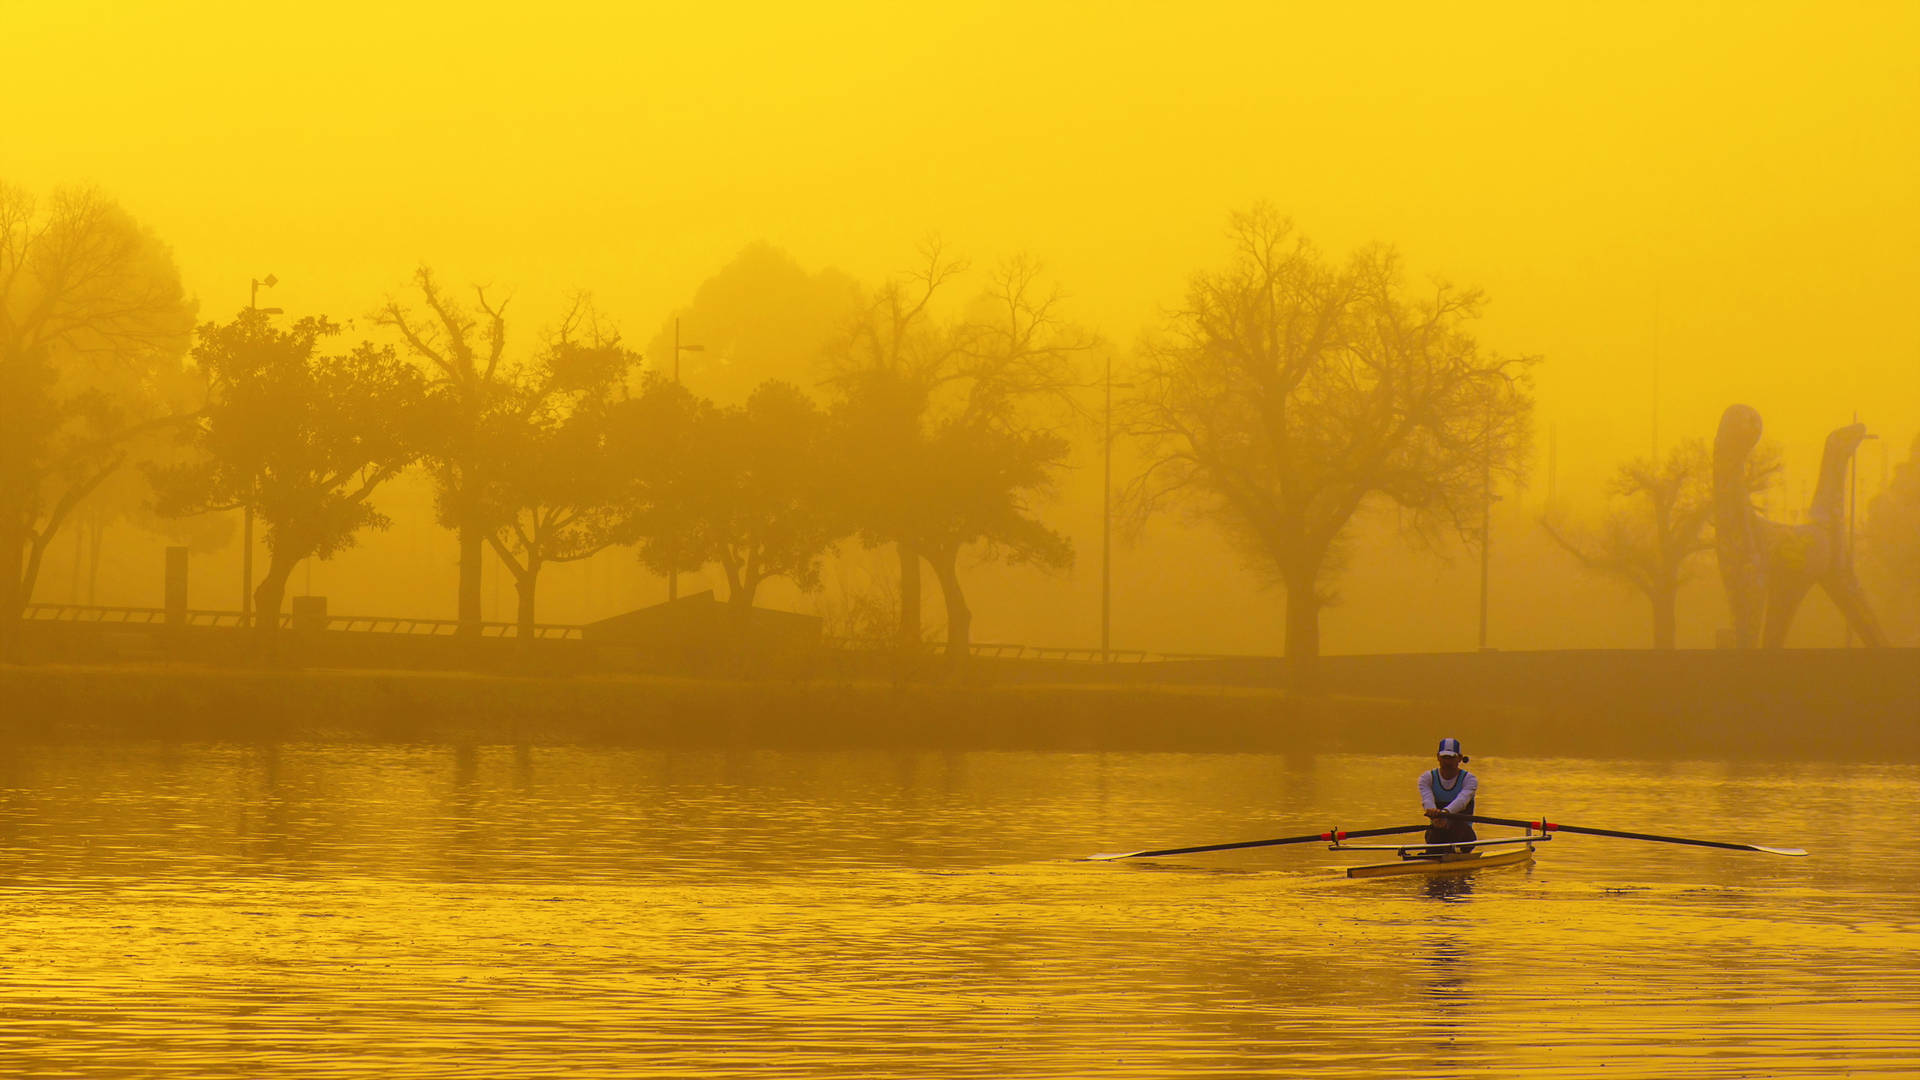 Rowing In The River Wallpaper